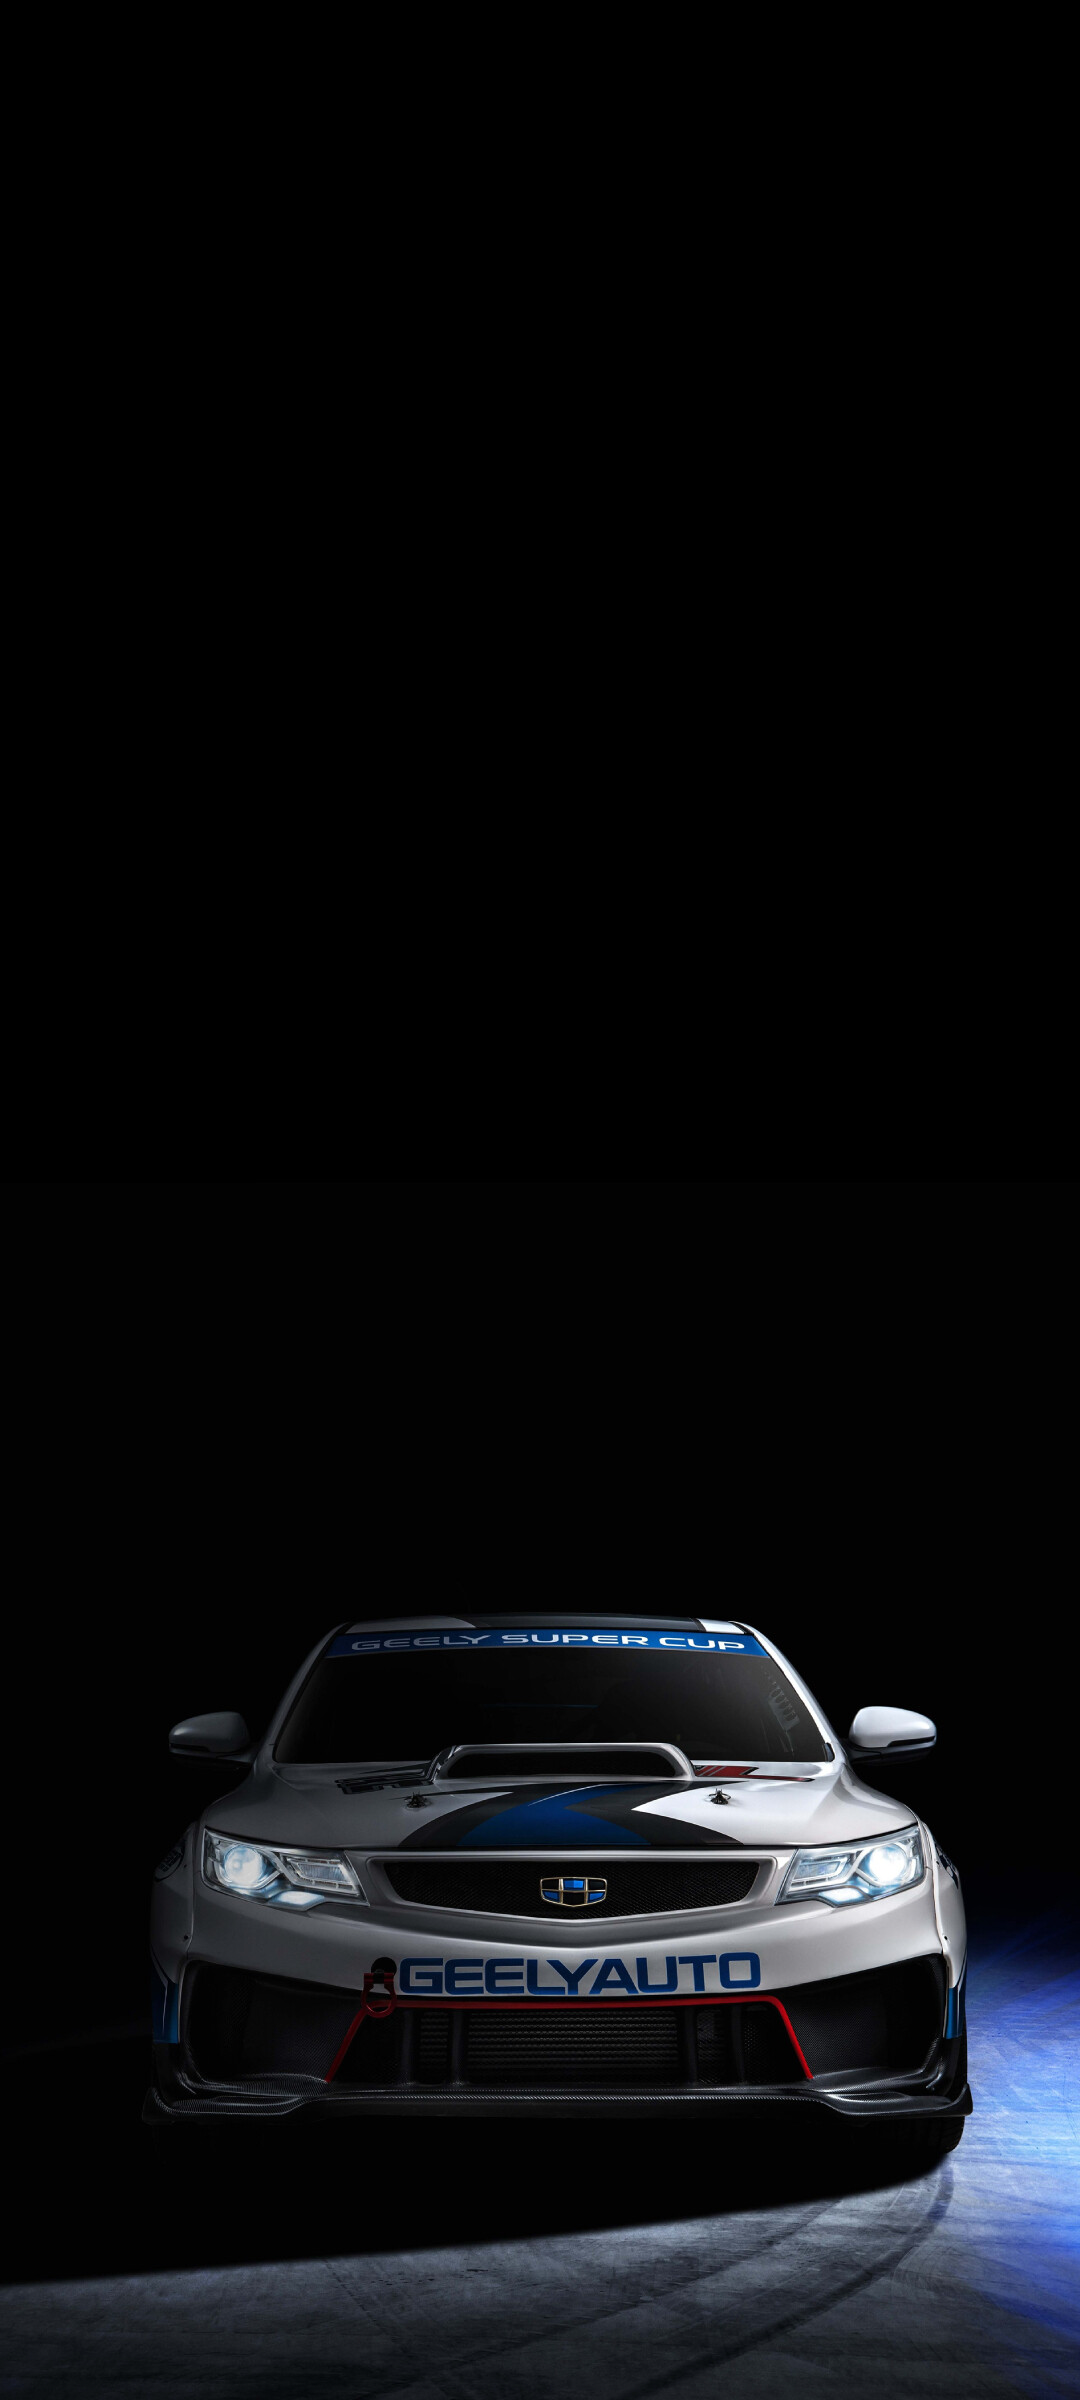 Geely: Produces motorcycles under its subsidiary Qianjiang Motorcycle and Benelli. 1080x2400 HD Background.